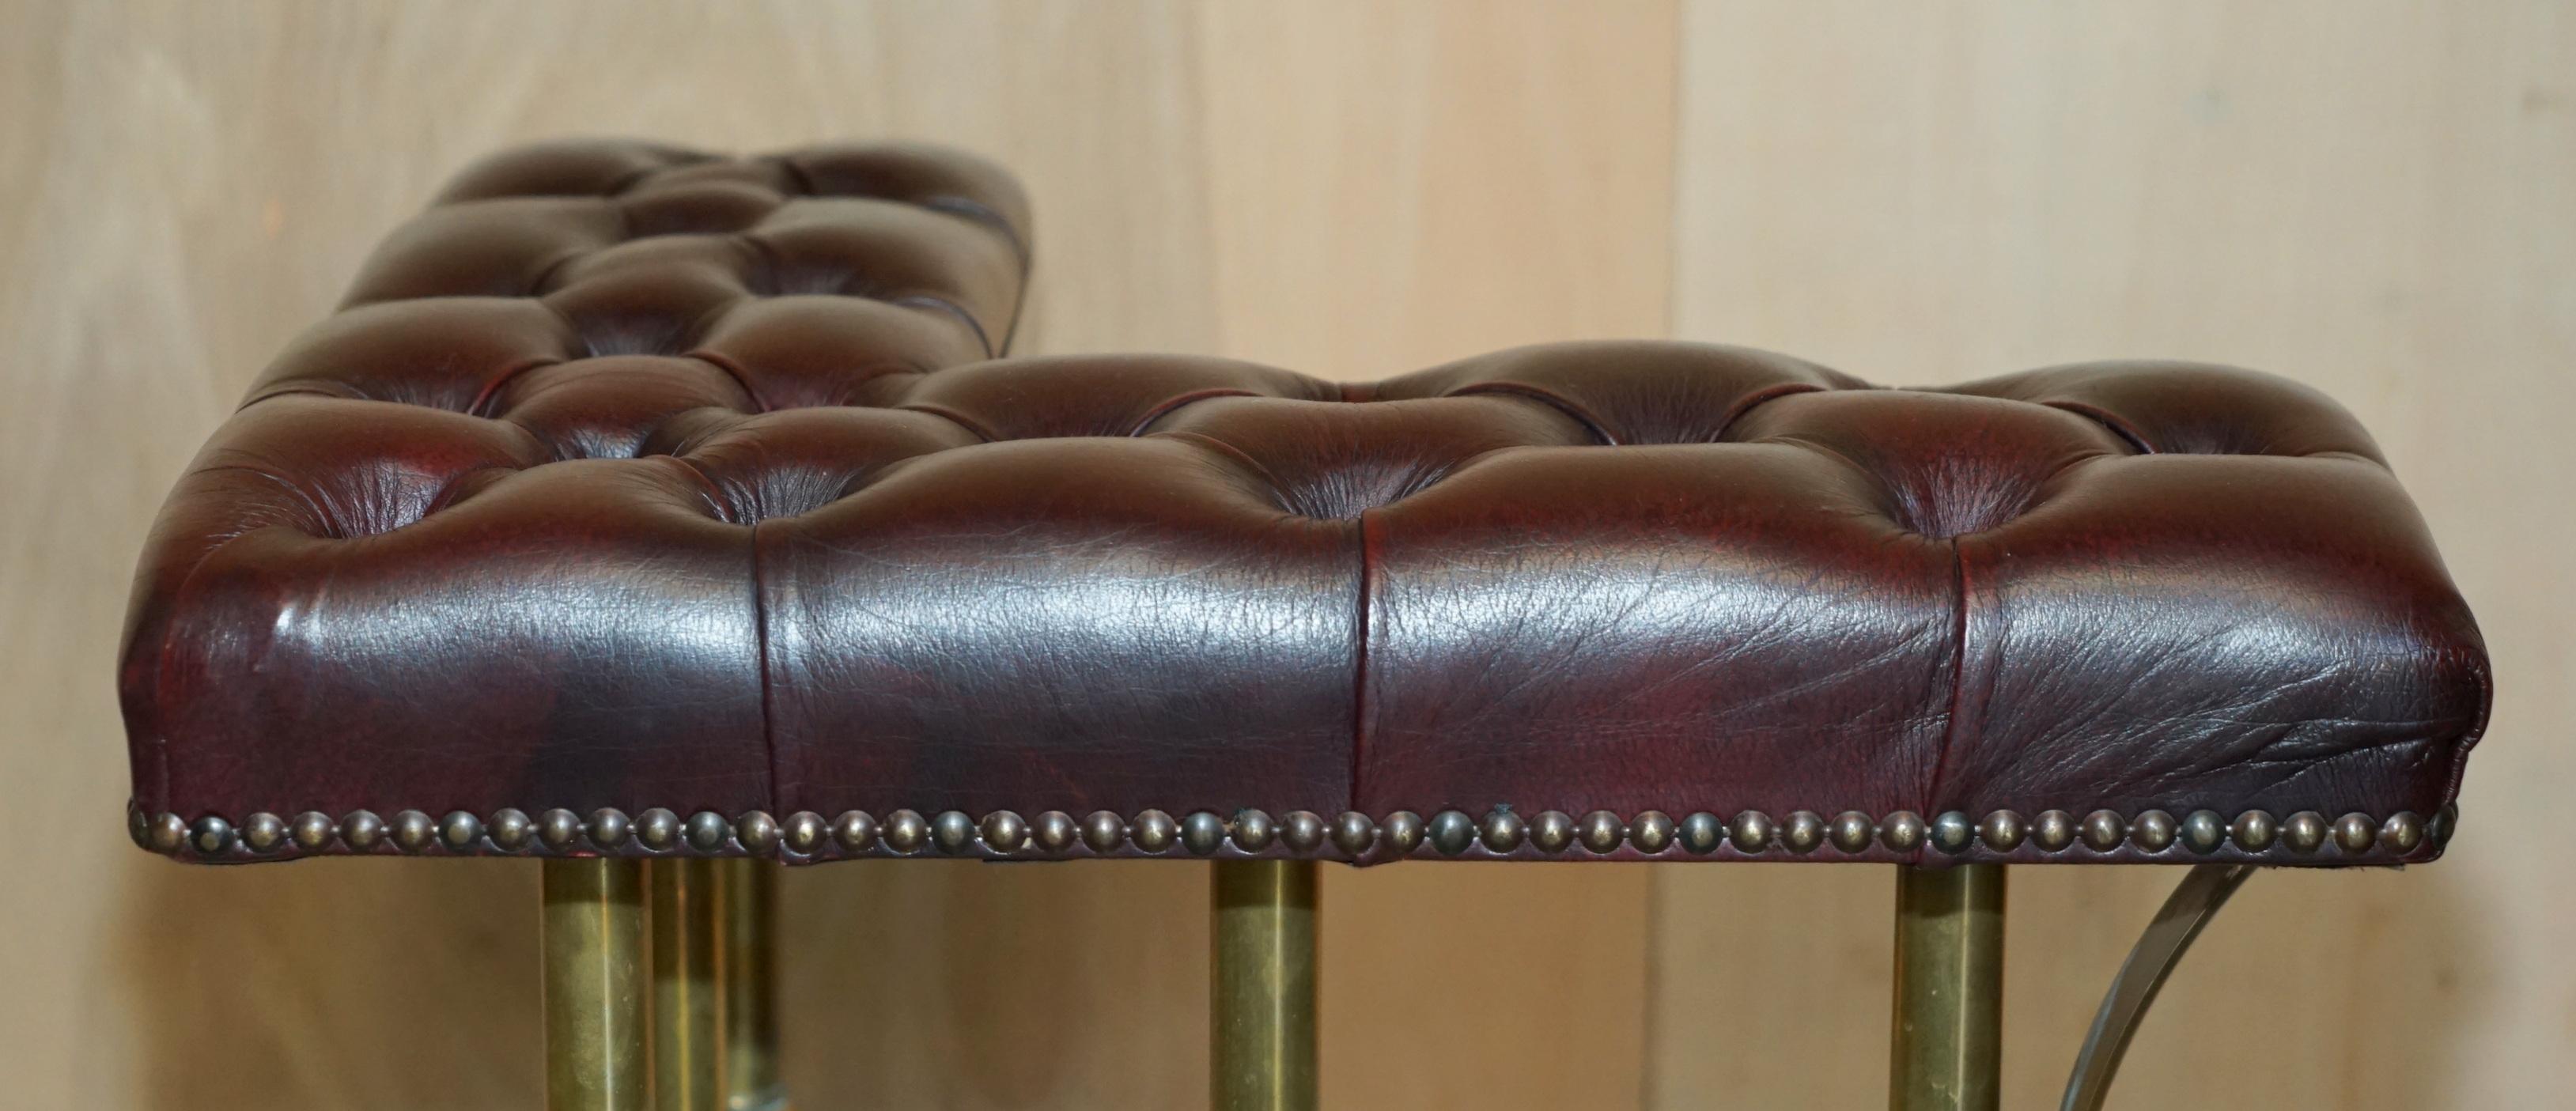 Hand-Crafted CHESTERFIELD TUFTED OXBLOOD LEATHER SOLID BRASS ANTiQUE VICTORIAN CLUB FENDER